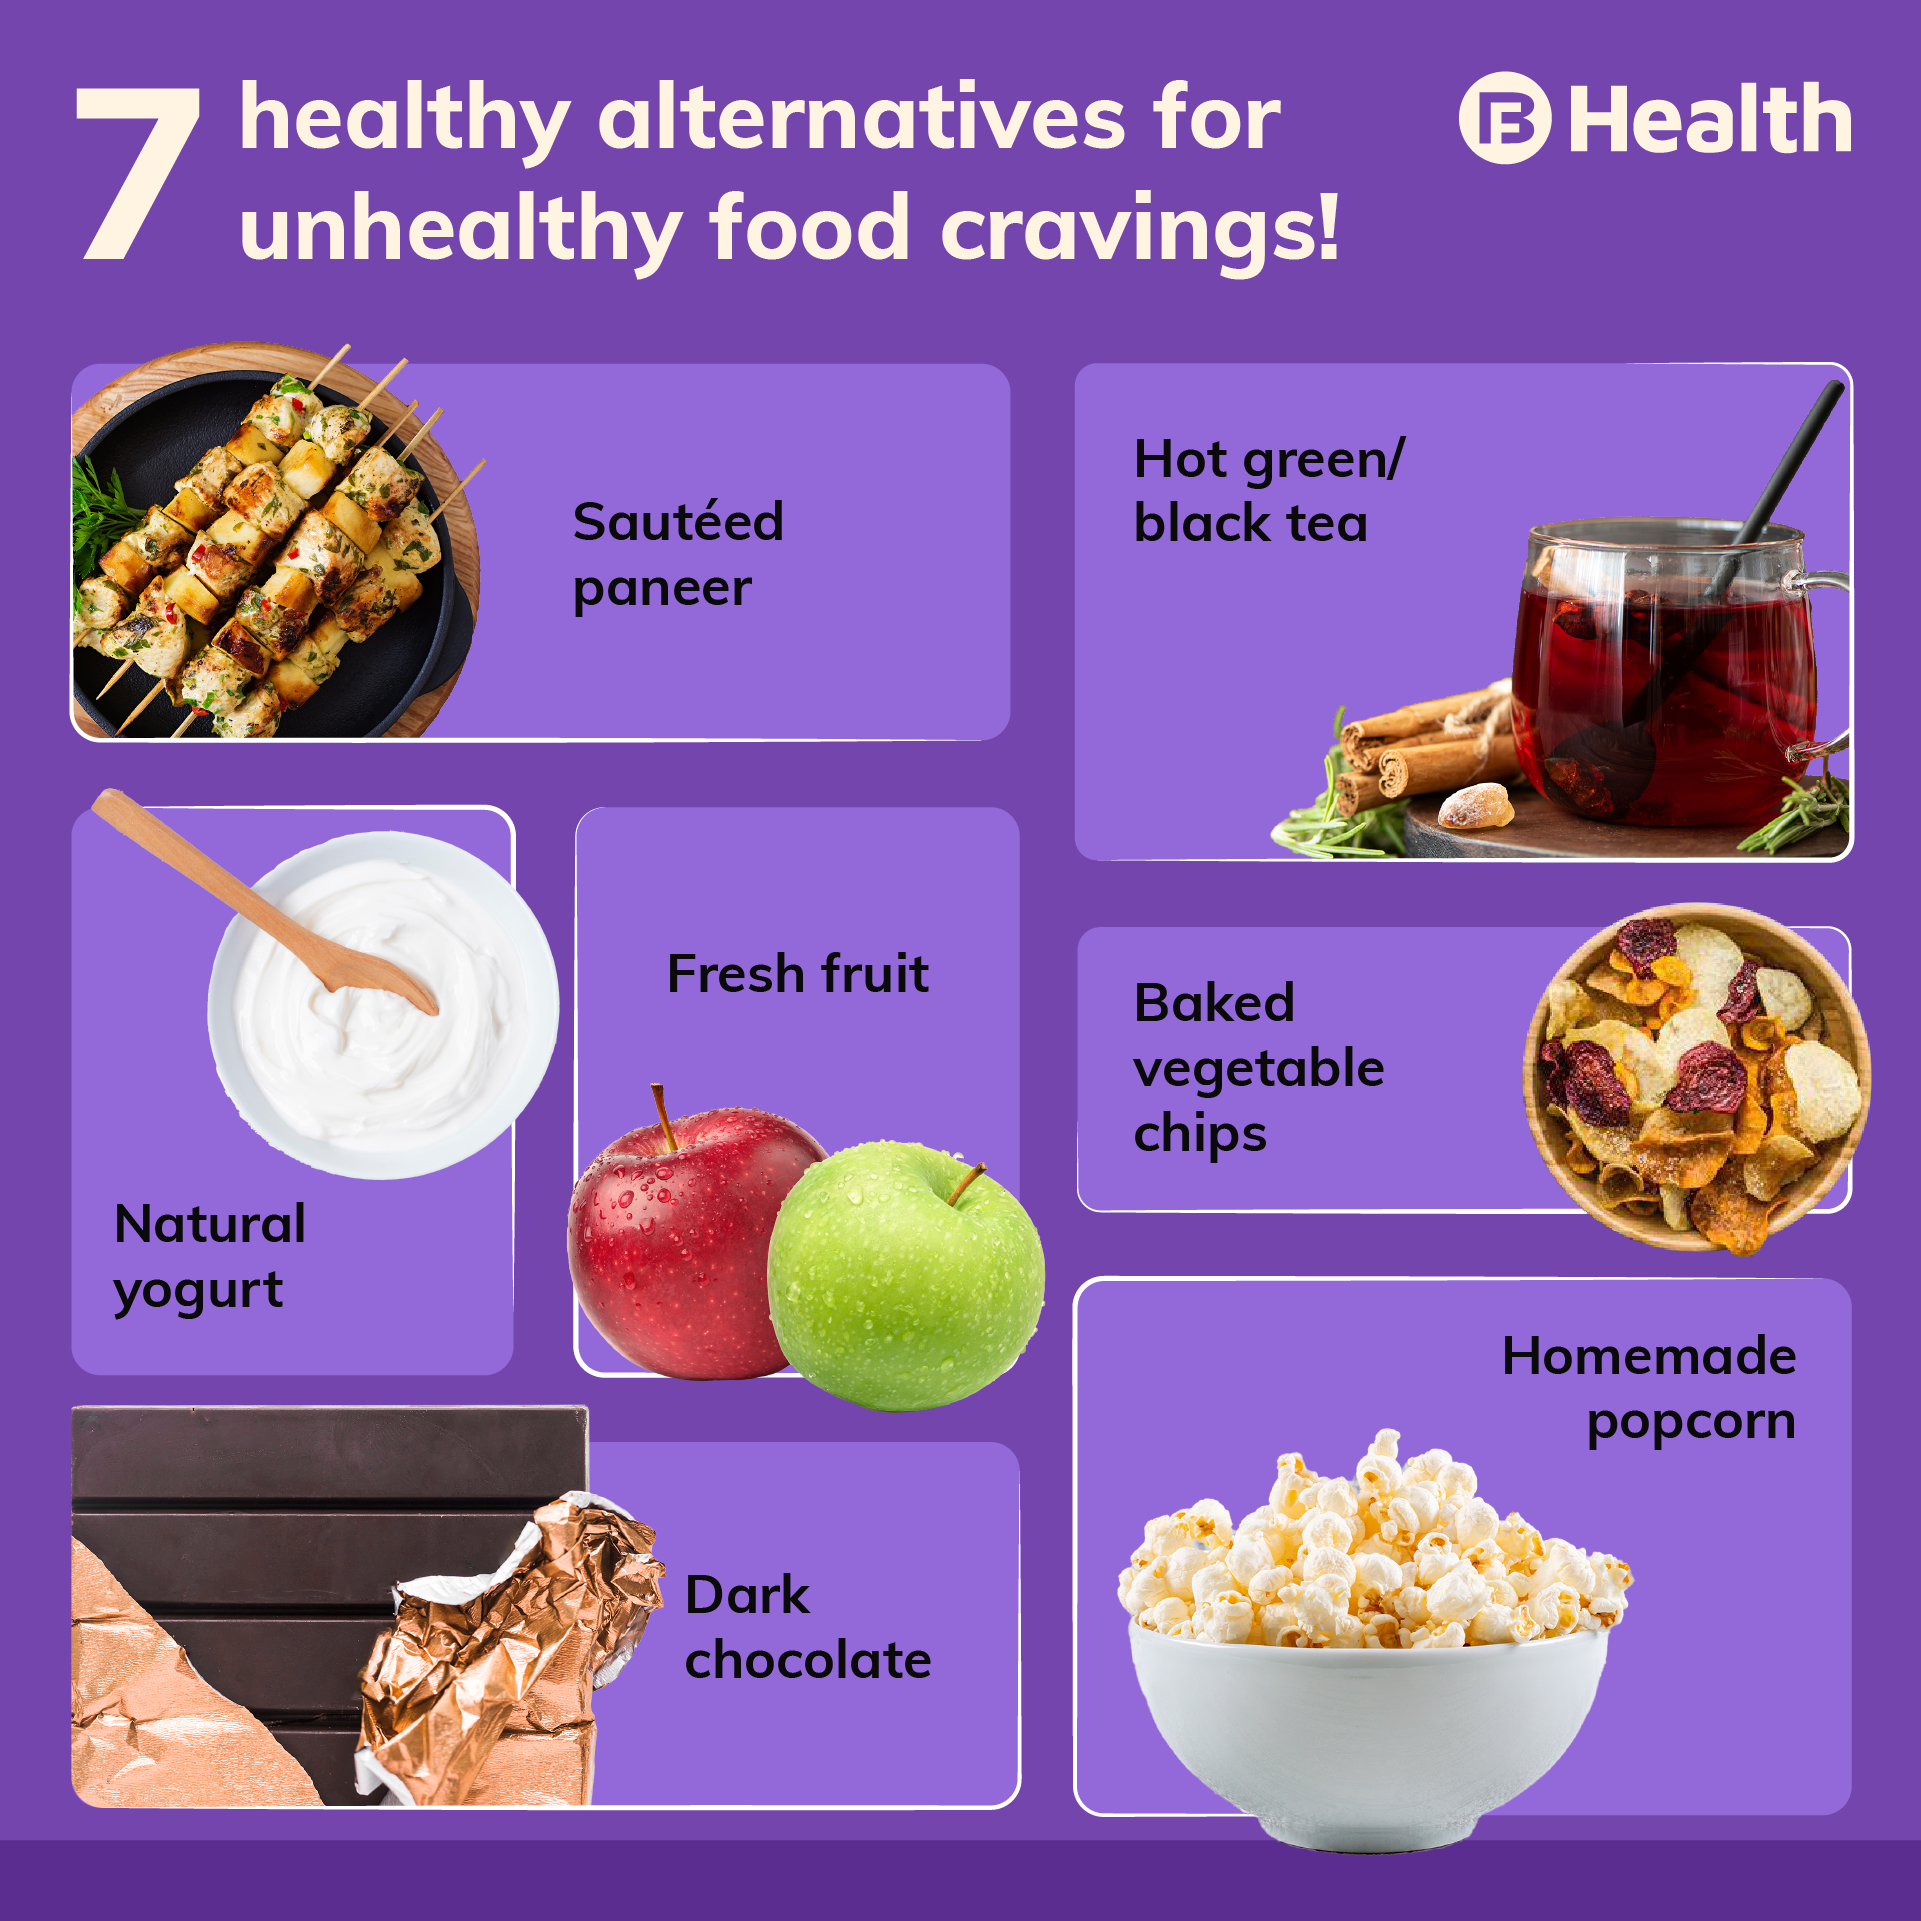 Healthy alternatives for cravings